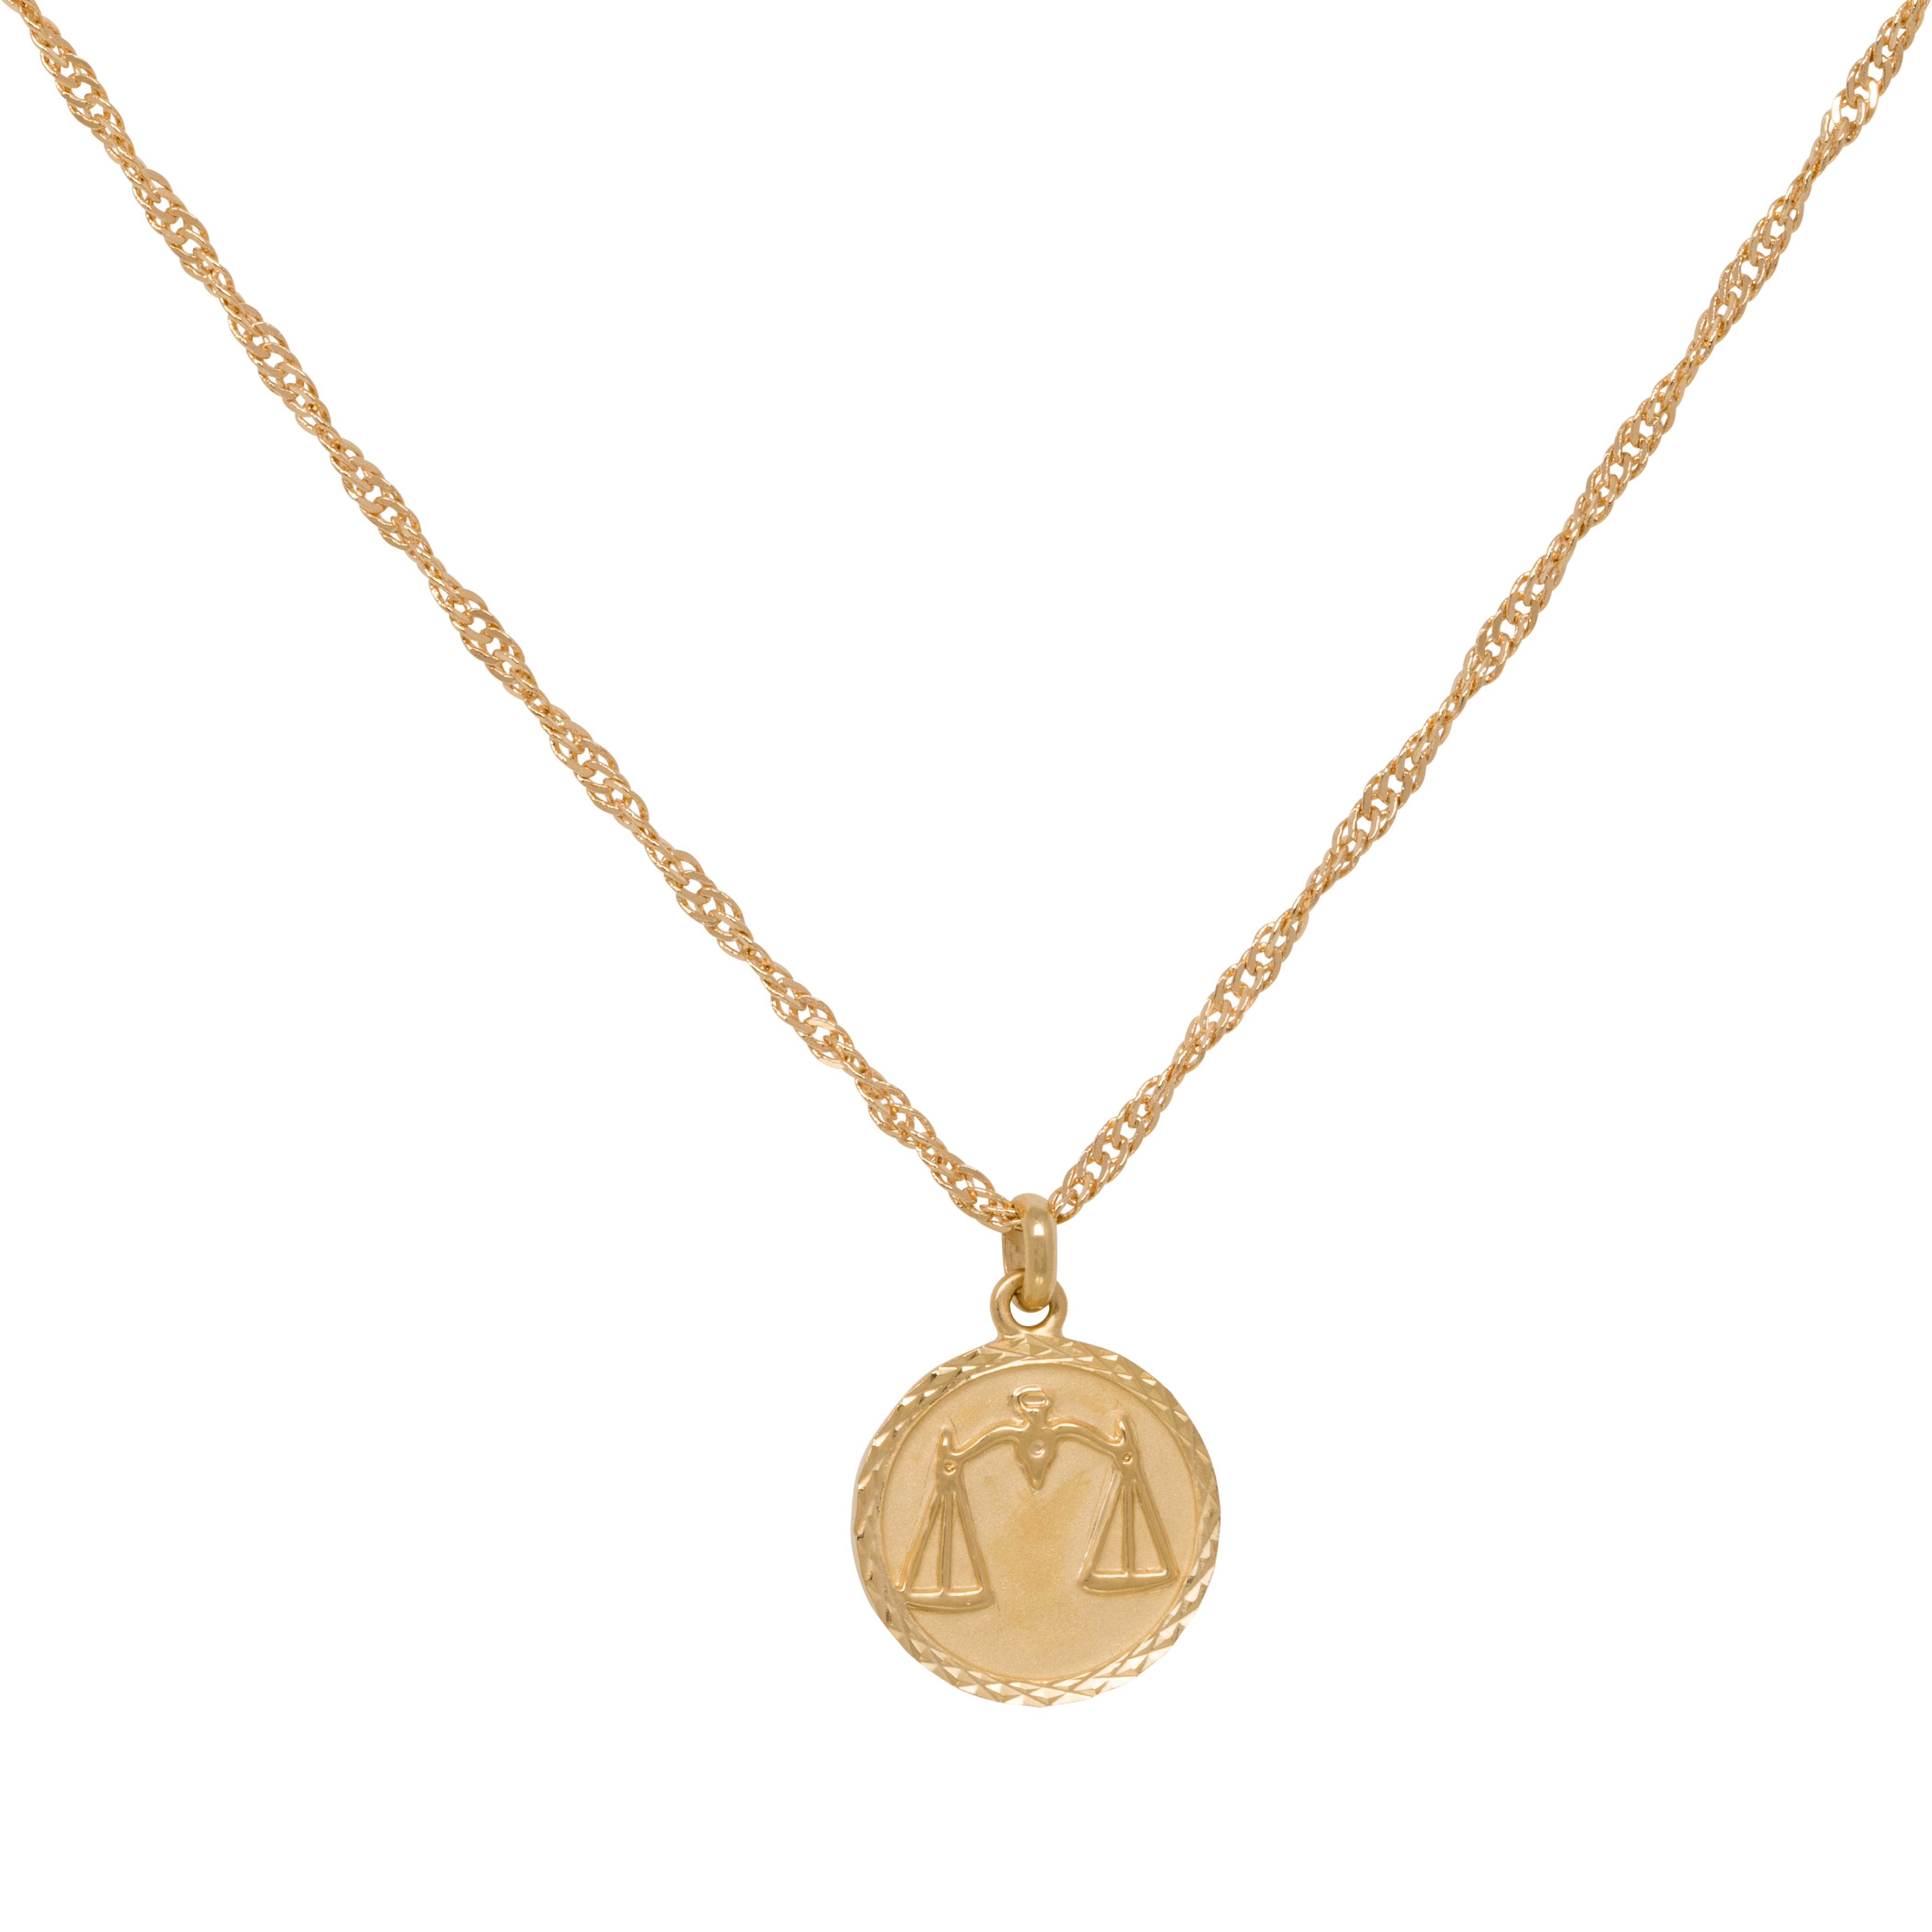 Zodiac Necklace / Libra with Rope Chain